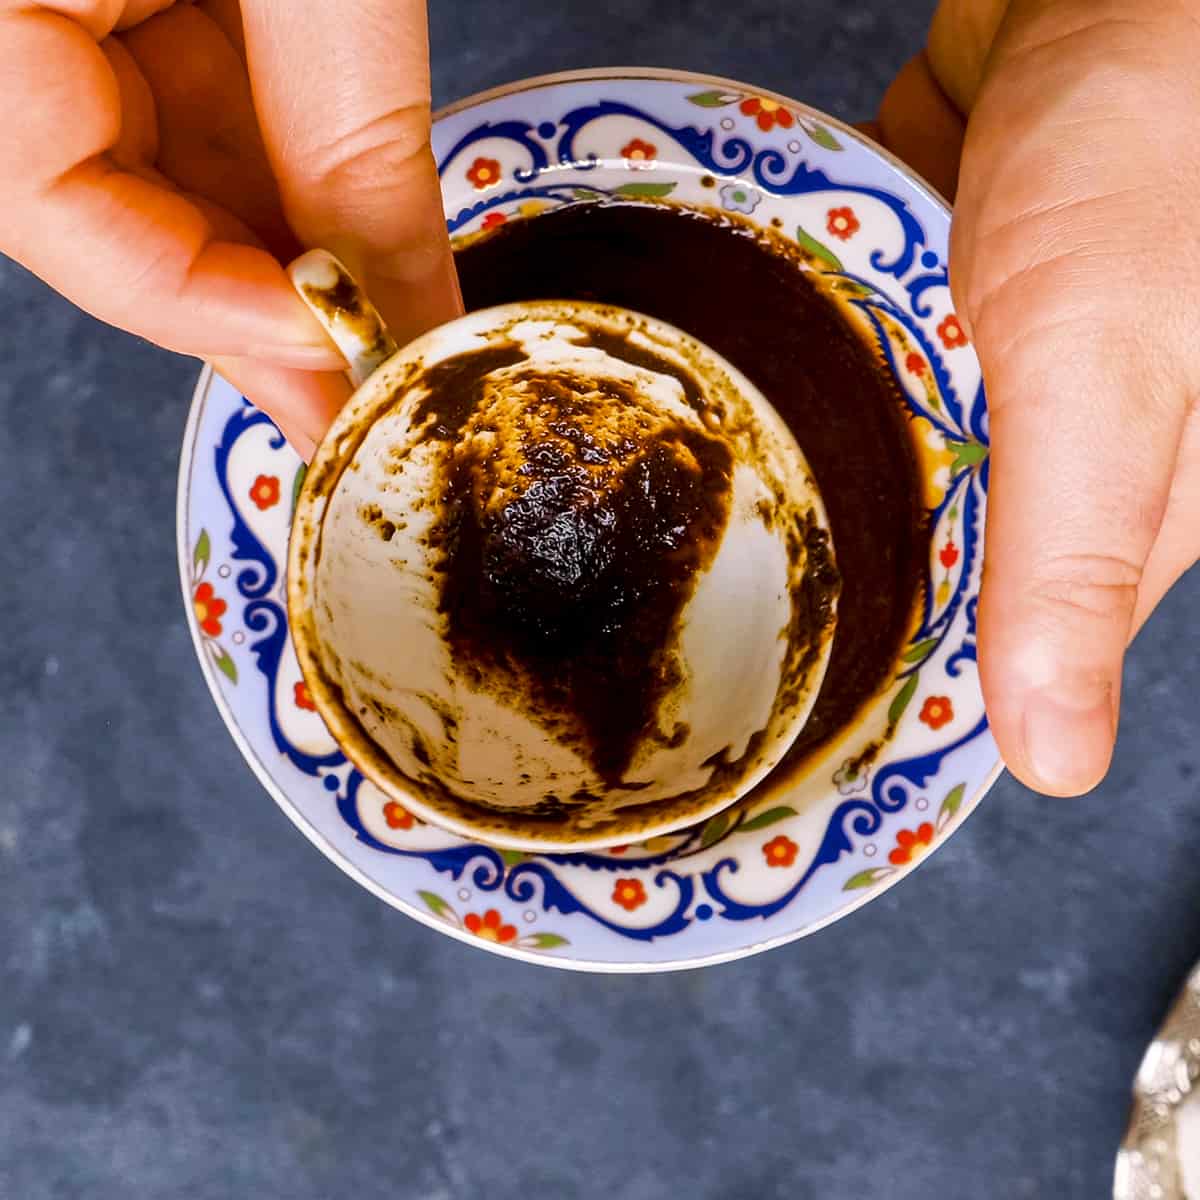 Hands showing the inside of a Turkish coffee cup for fortune telling.